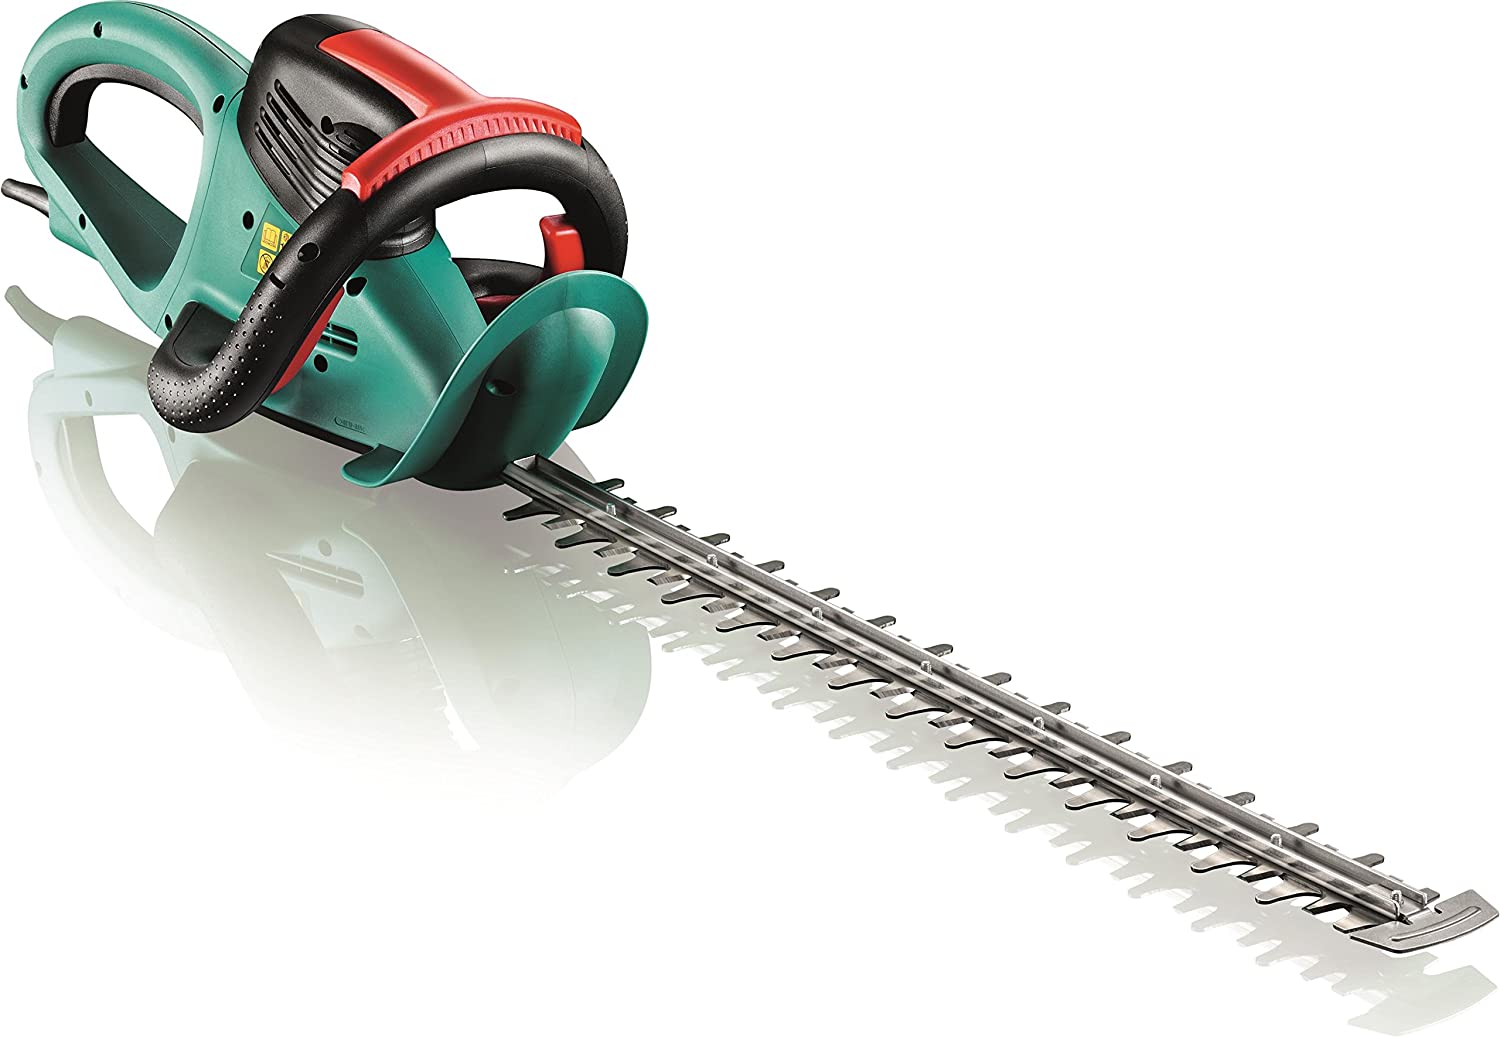 Bosch Hedge Trimmers Category